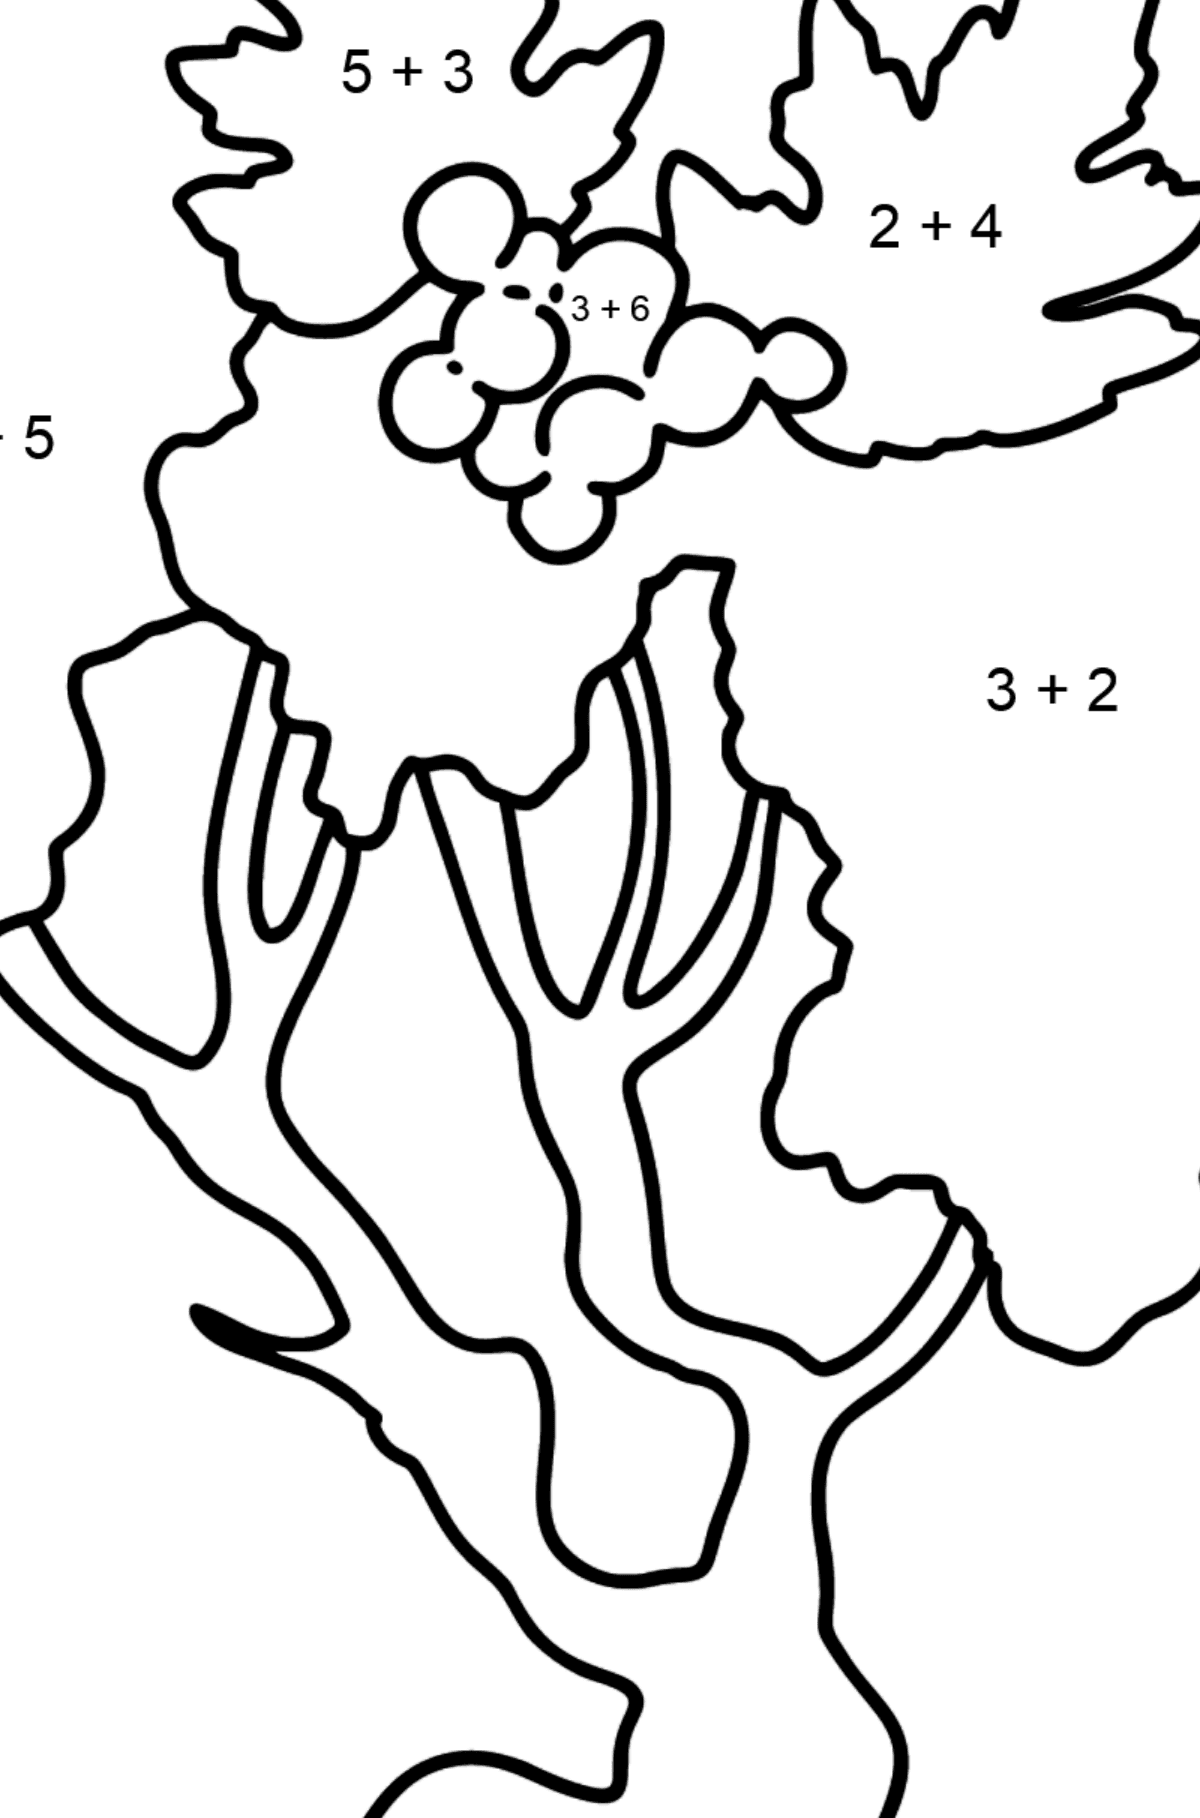 Hawthorn coloring page - Math Coloring - Addition for Kids